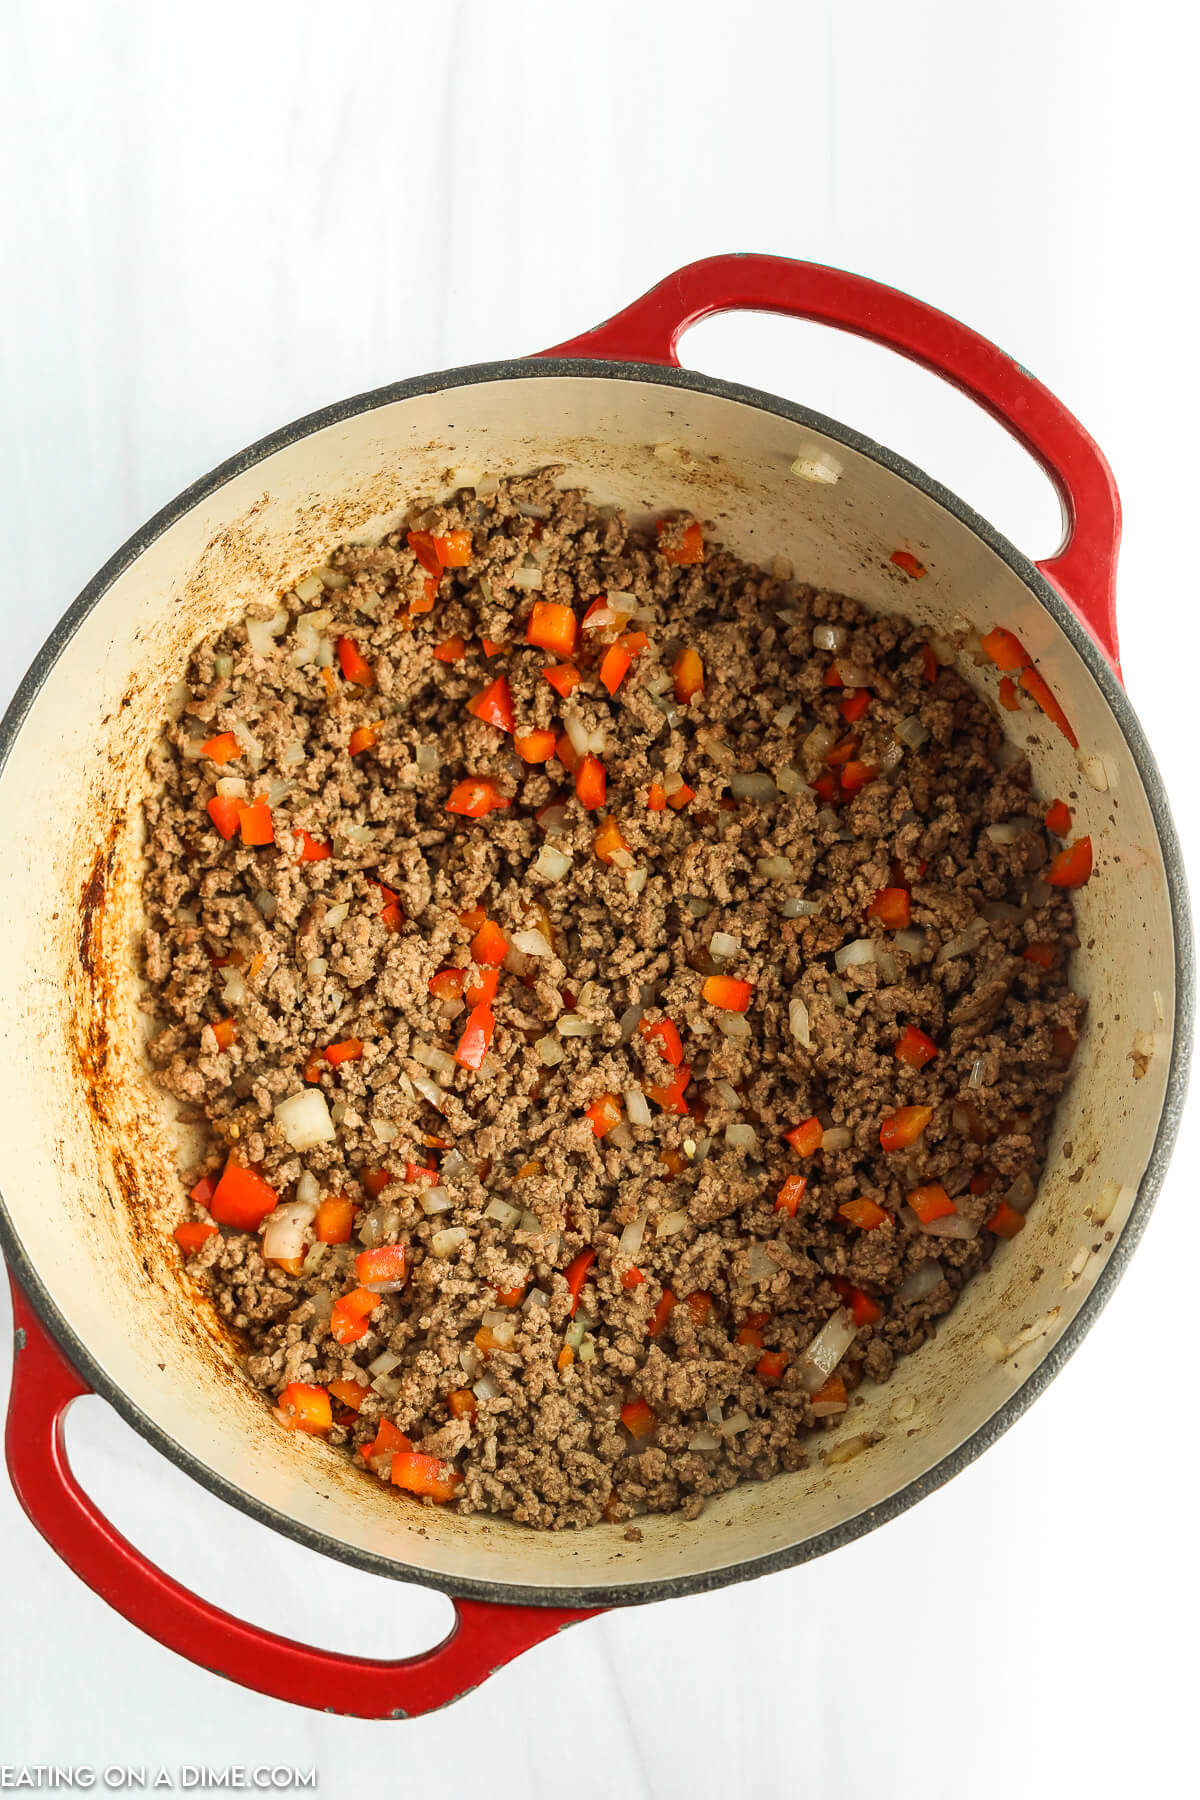 Adding the cut vegetables to the ground beef in a large pot